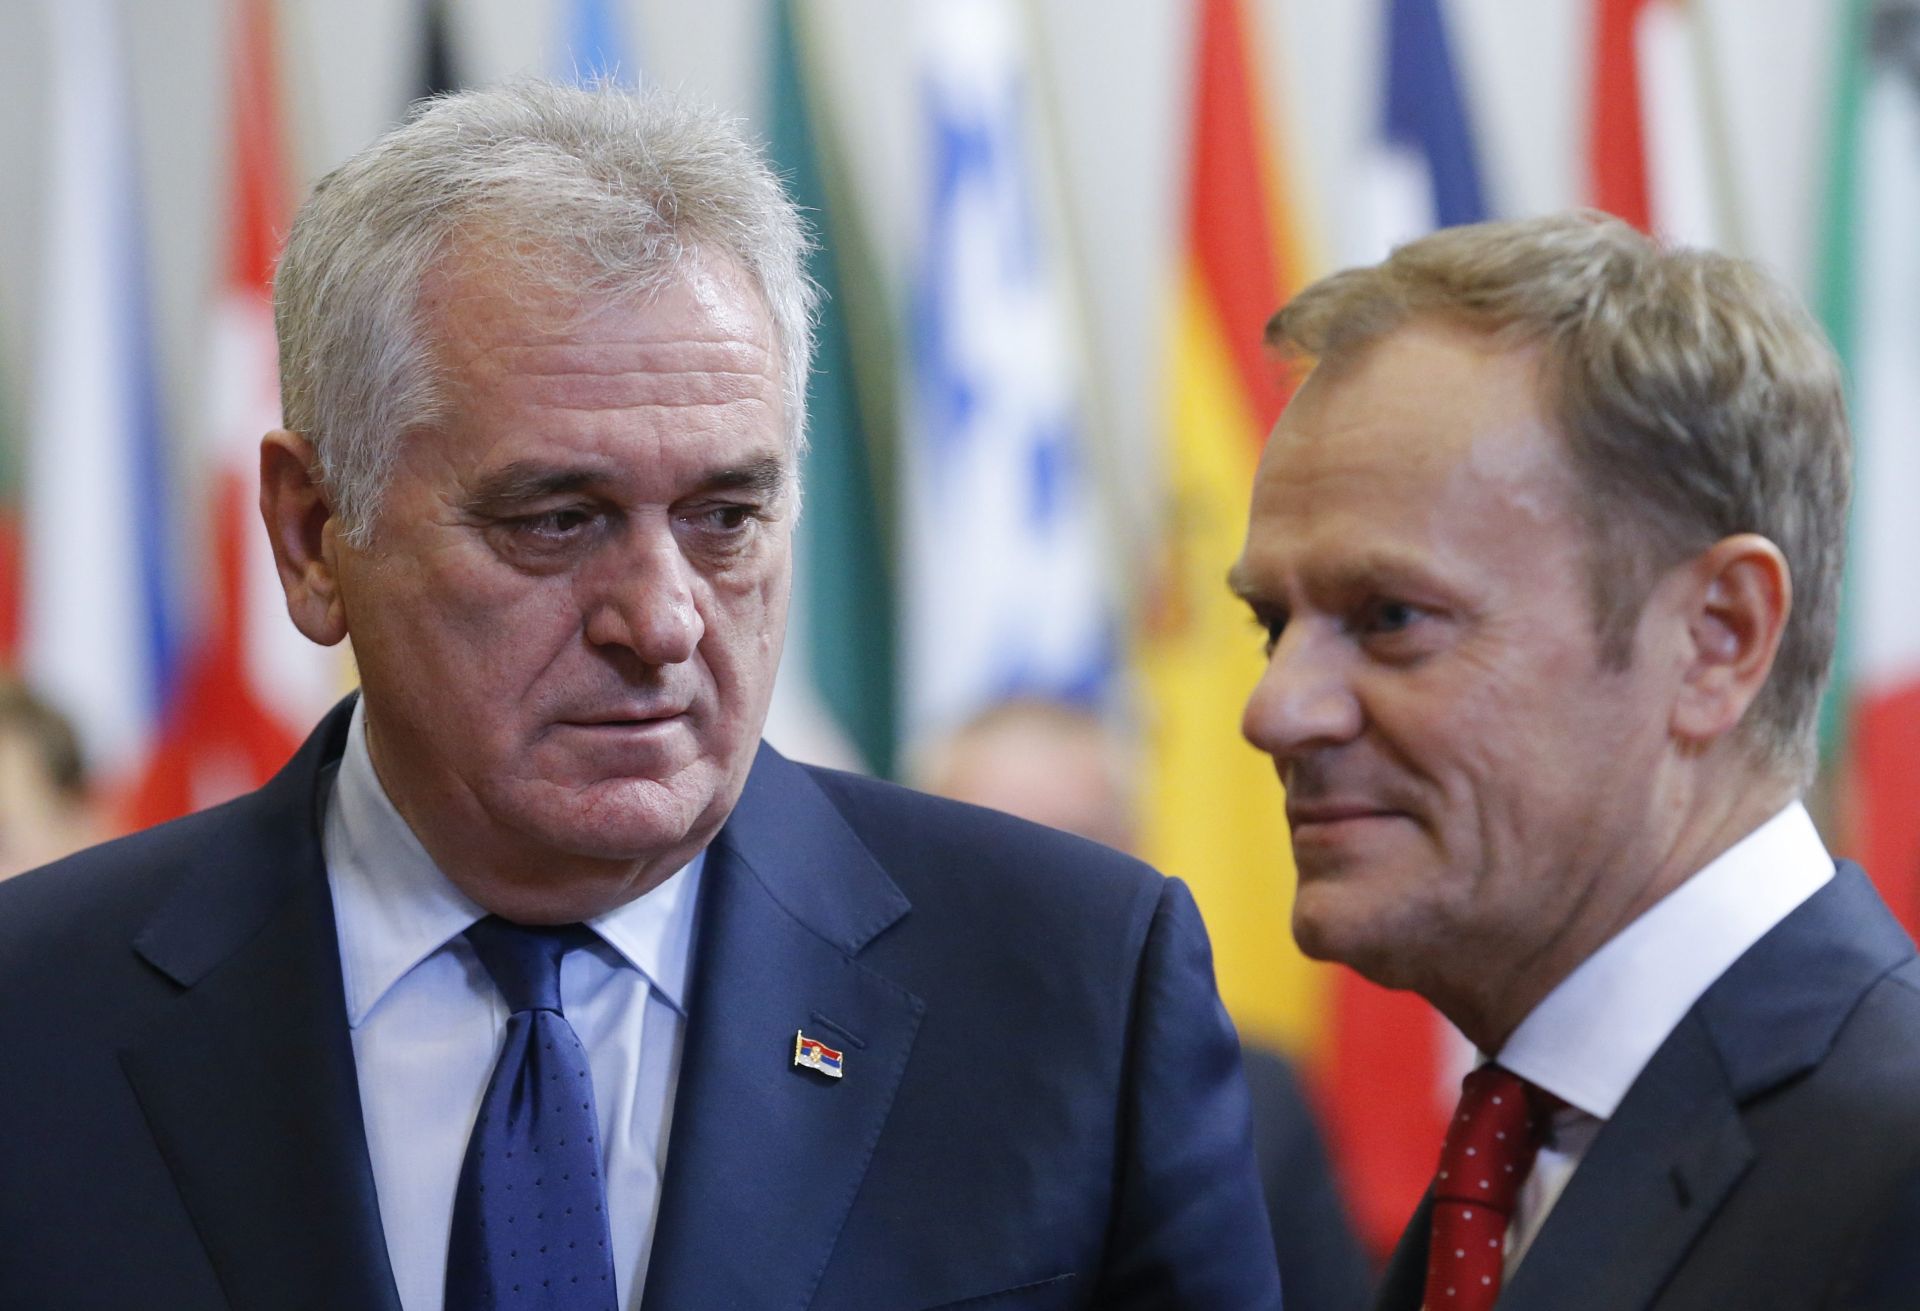 epa05071223 Serbian President Tomislav Nikolic (L) is welcomed by EU council President Donald Tusk (R) prior to a meeting at the European council in Brussels, Belgium, 16 December 2015.  EPA/OLIVIER HOSLET